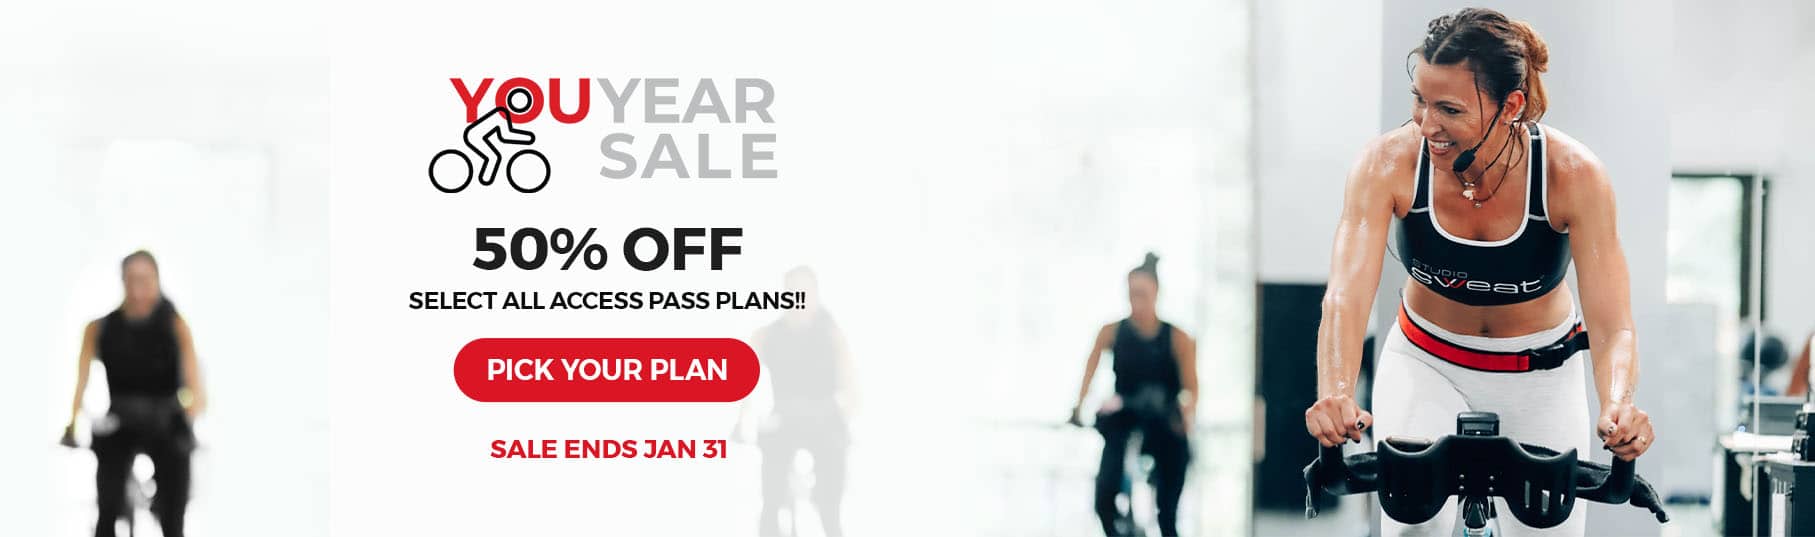 Shop Our YOU YEAR SALE SUPER SALE and Get Unlimited Access to Studio SWEAT onDemand Indoor Cycling and Training workouts from home!